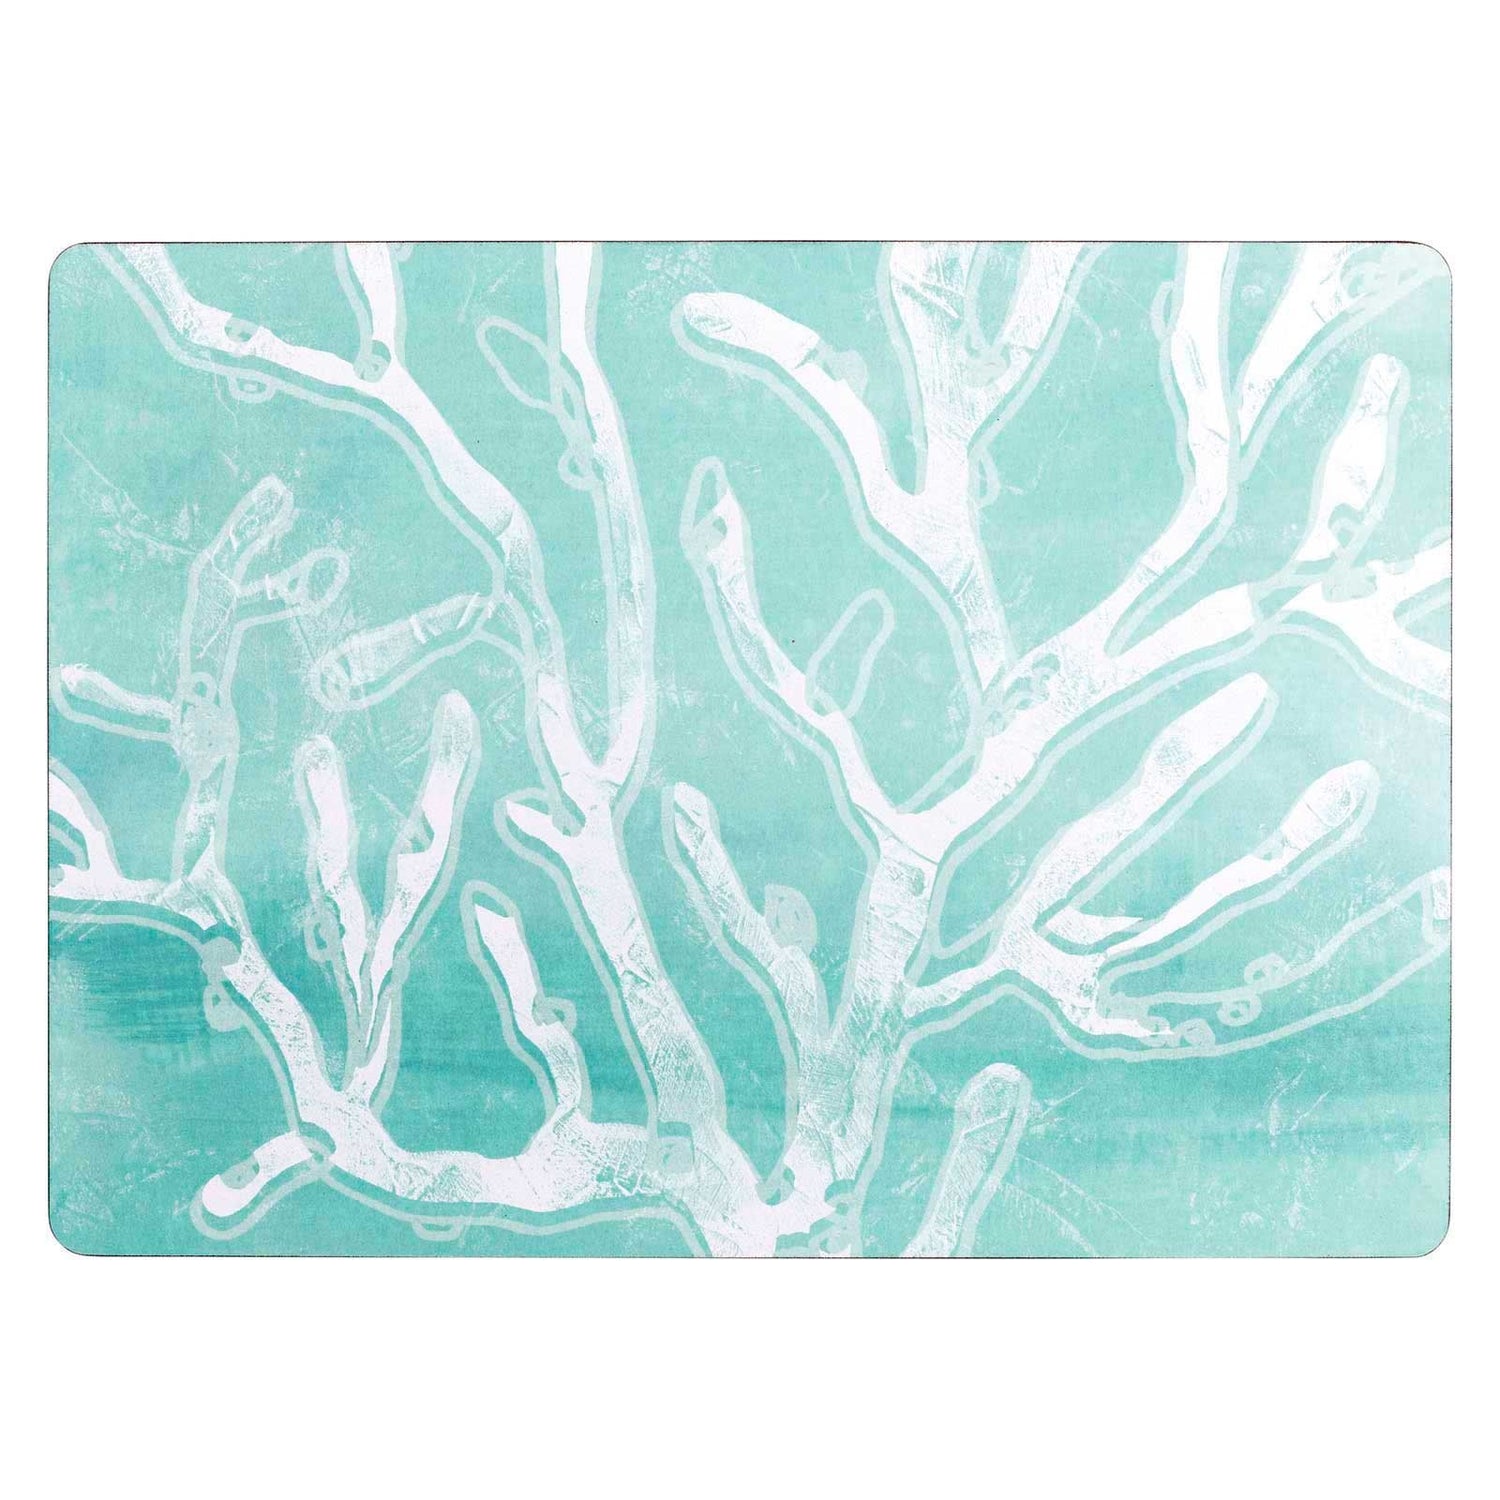 Cerulean Sea Coral Art Placemats - Set of 4 Placemat - rockflowerpaper